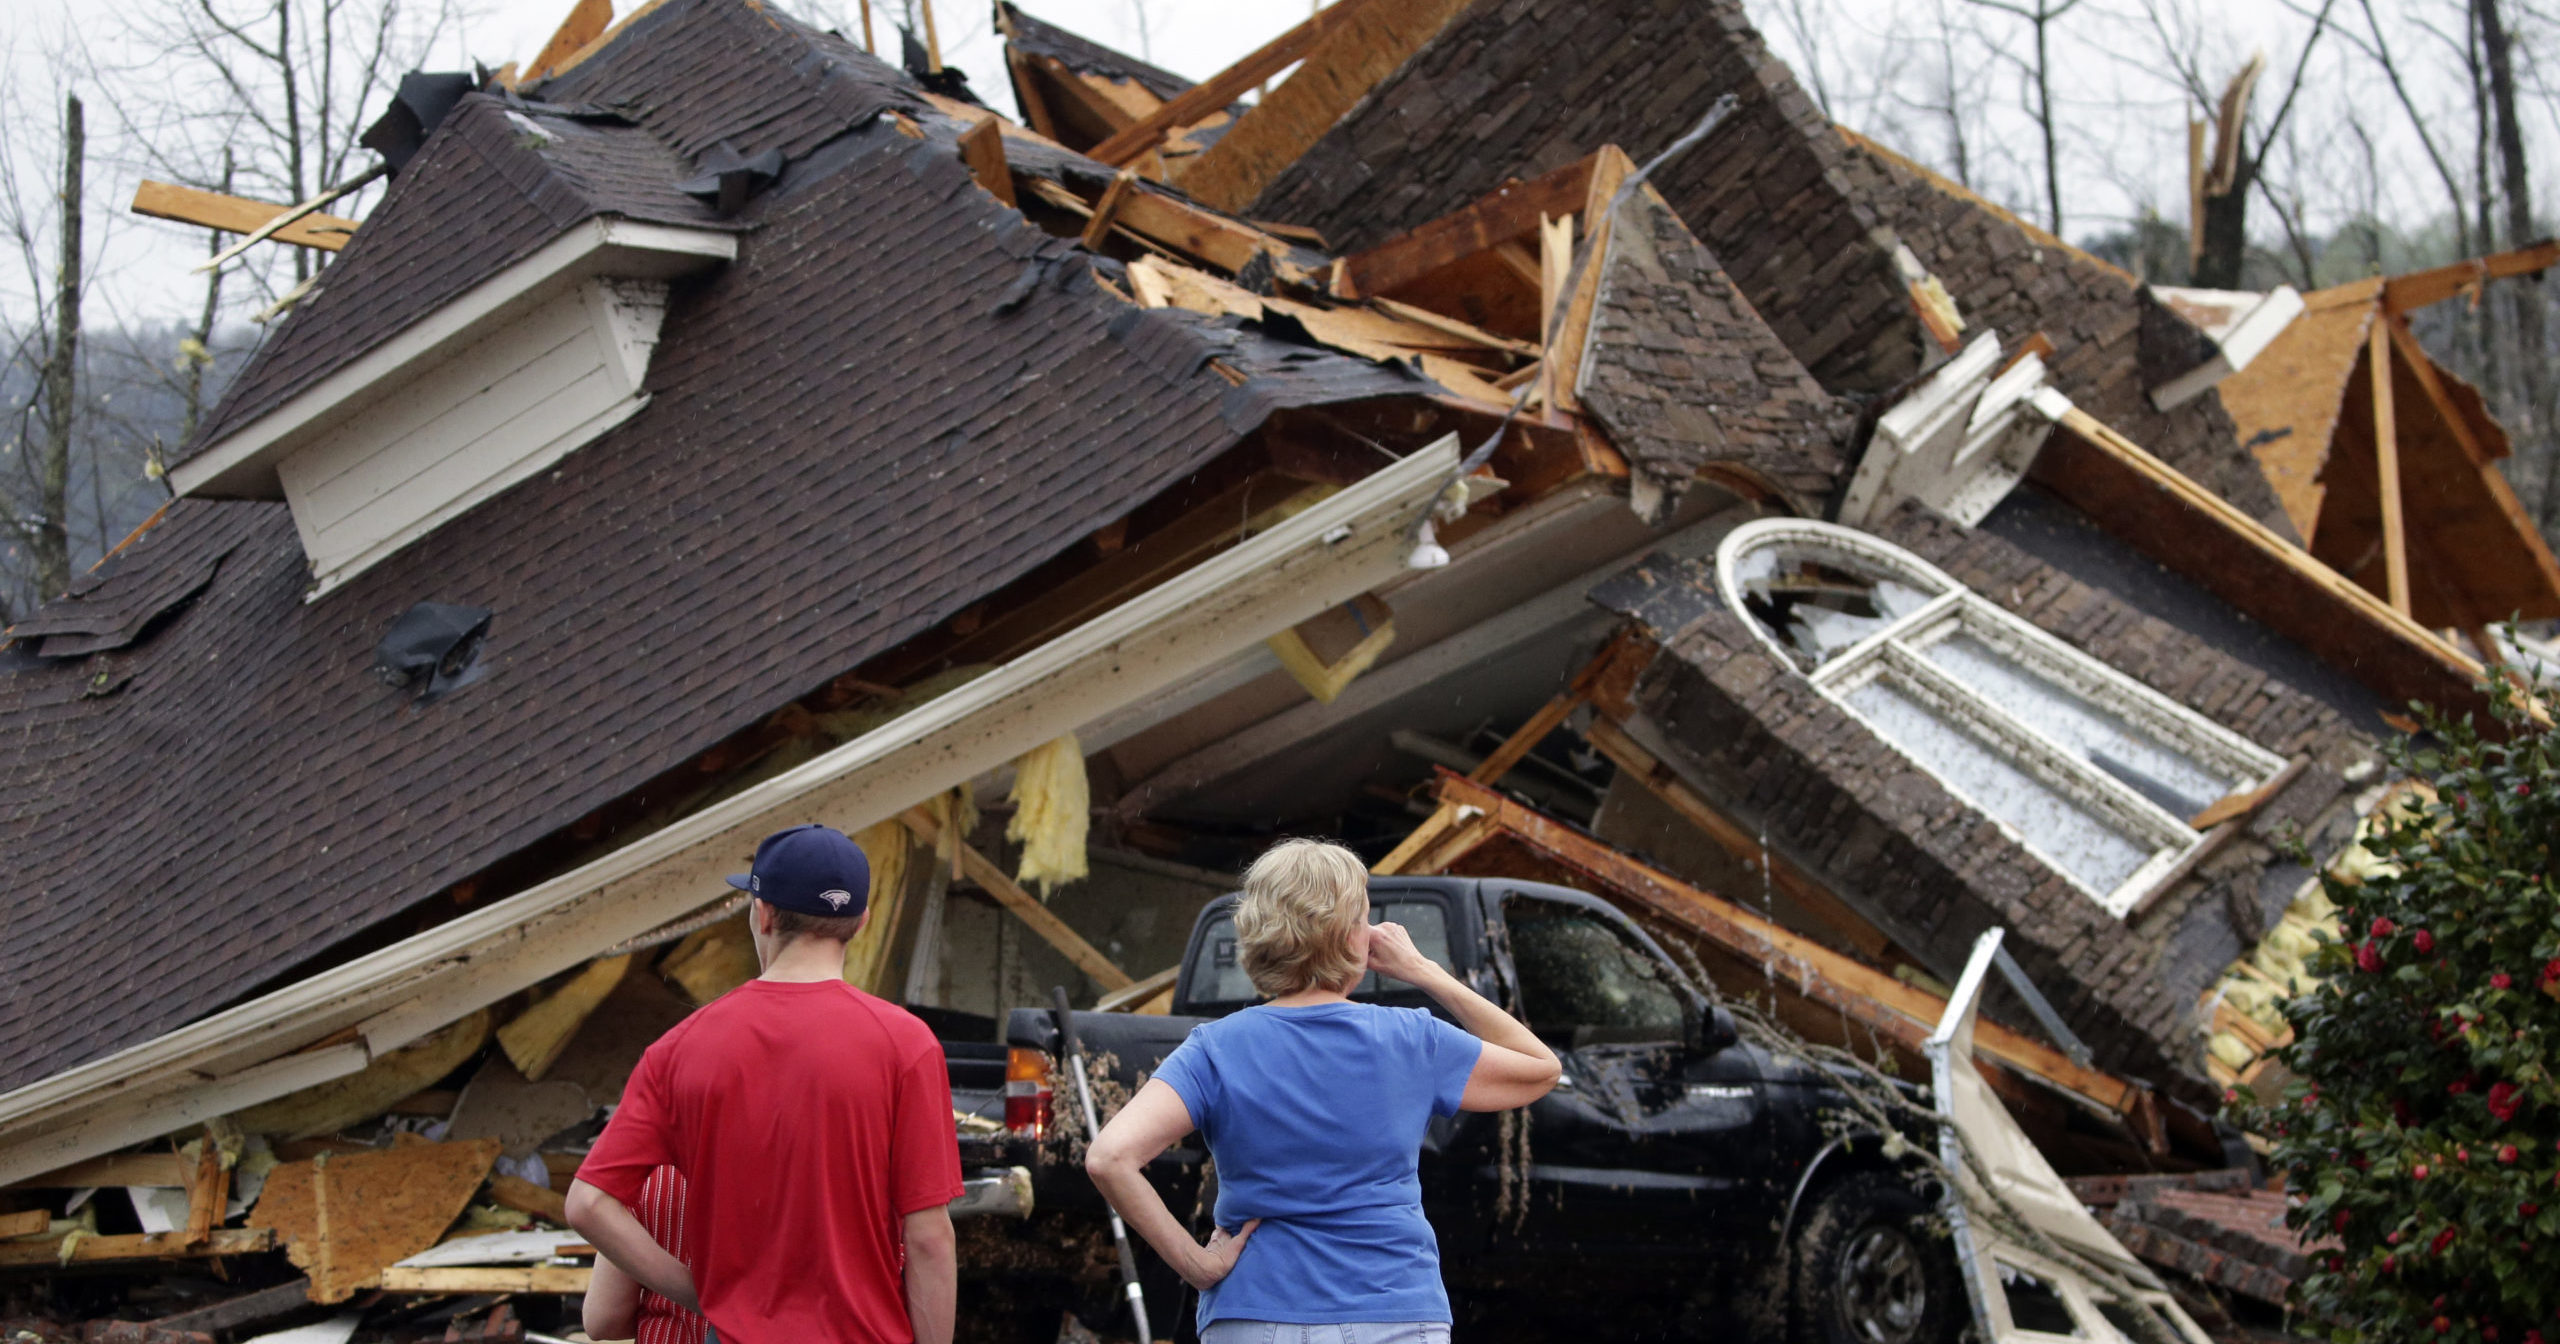 Residents survey damage to homes after a tornado touched down south of Birmingham, Alabama, on March 25, 2021.